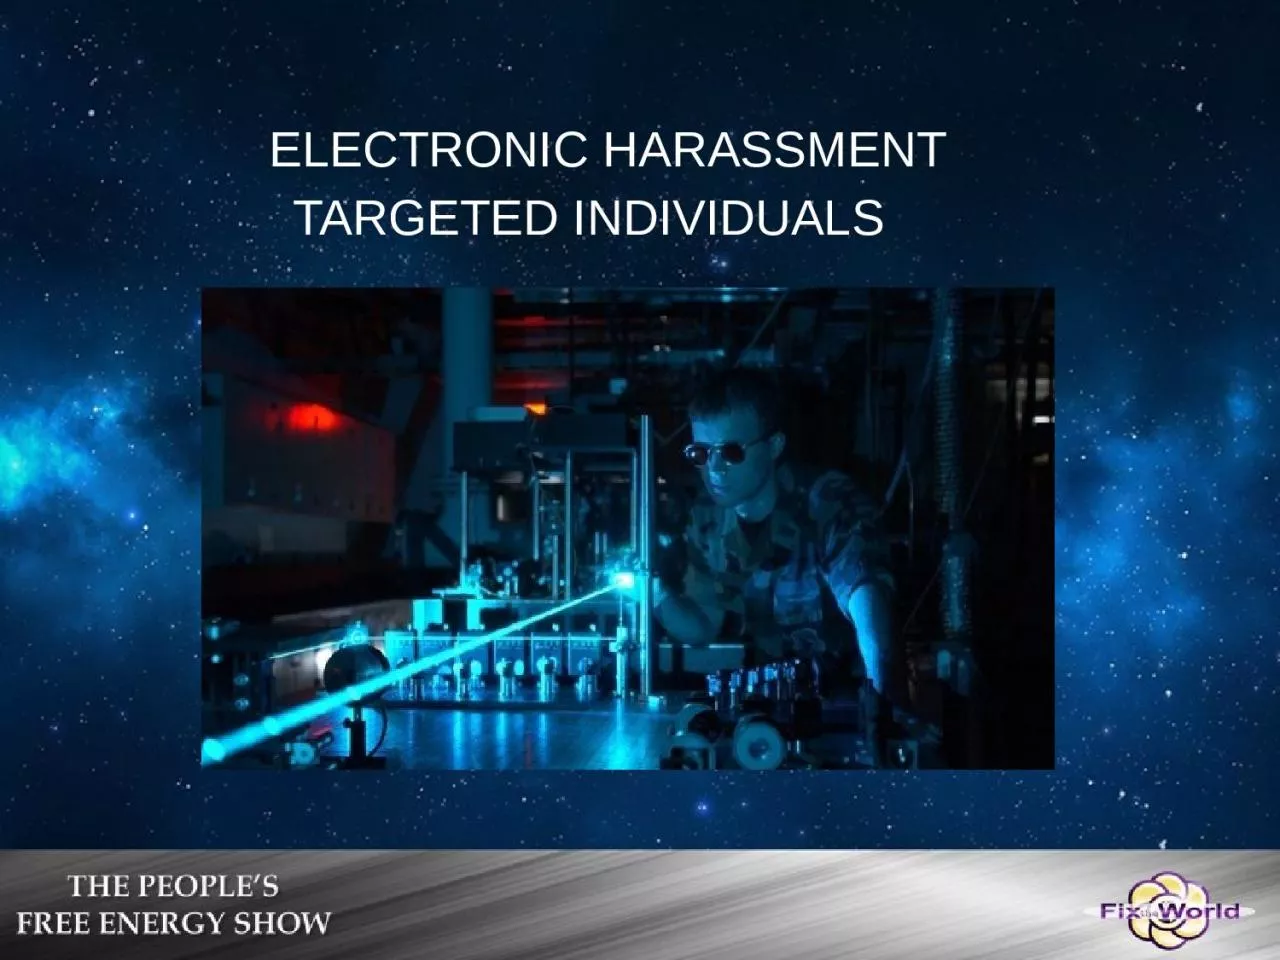 ELECTRONIC HARASSMENT TARGETED INDIVIDUALS